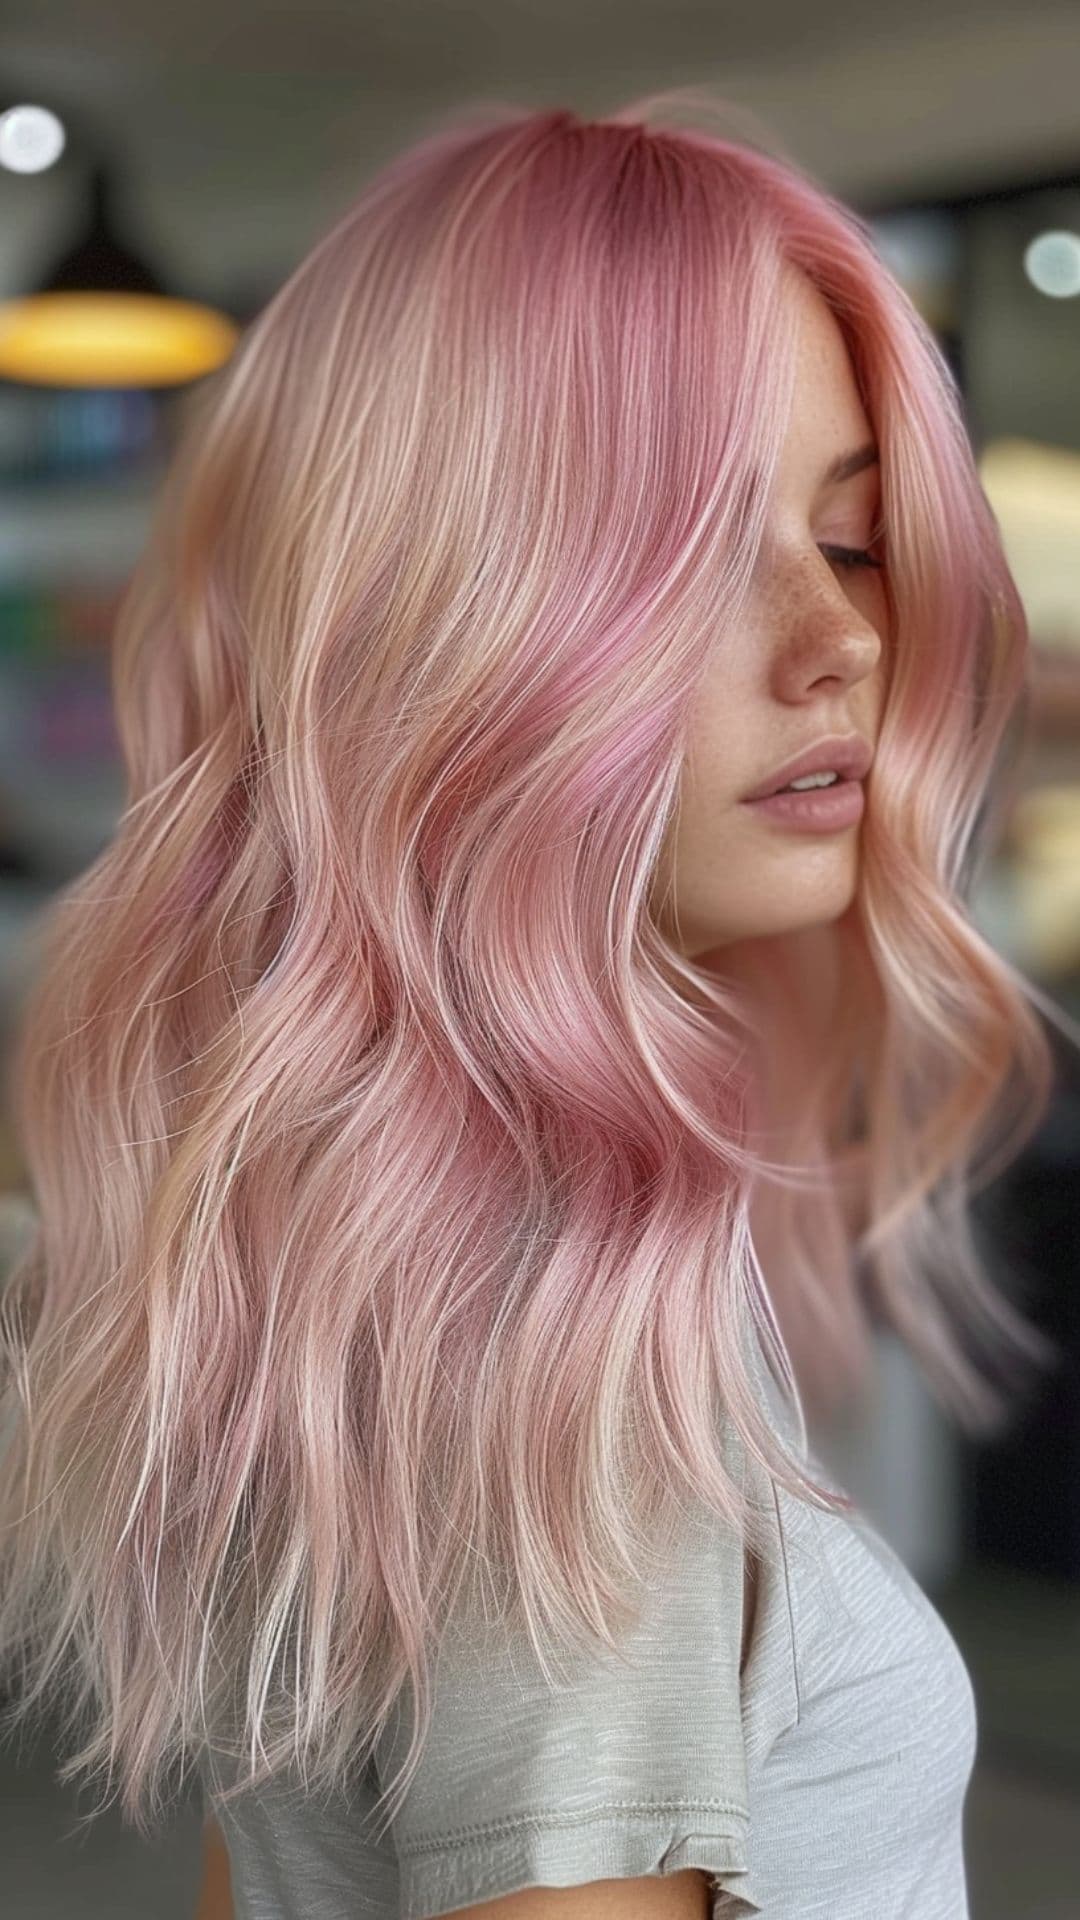 A woman modelling a candy floss pink hair.